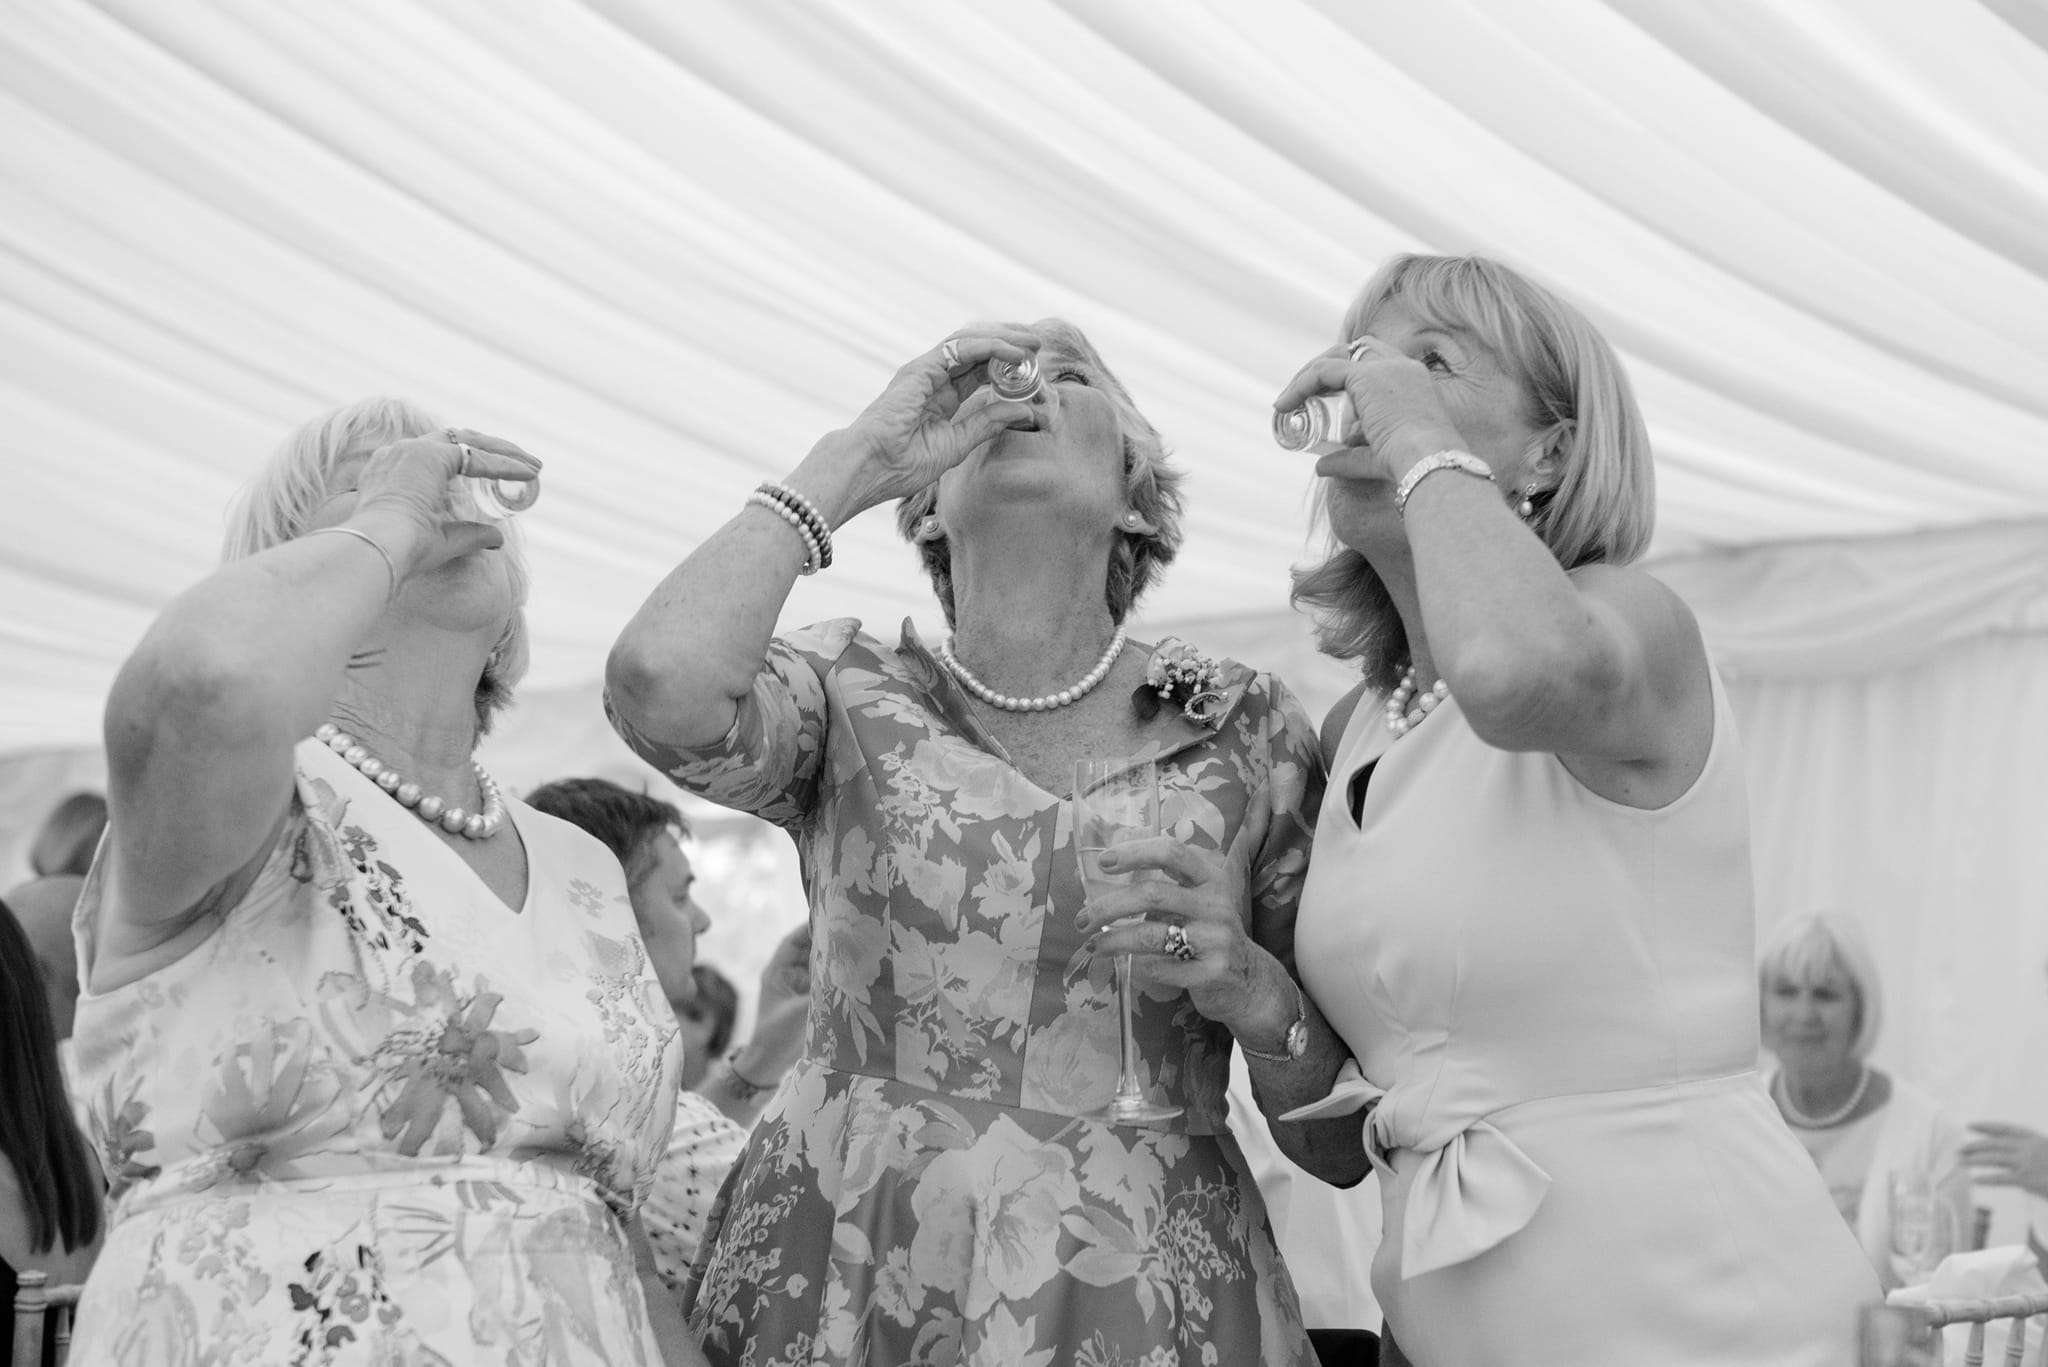 Mothers of the bride and groom drinking shots